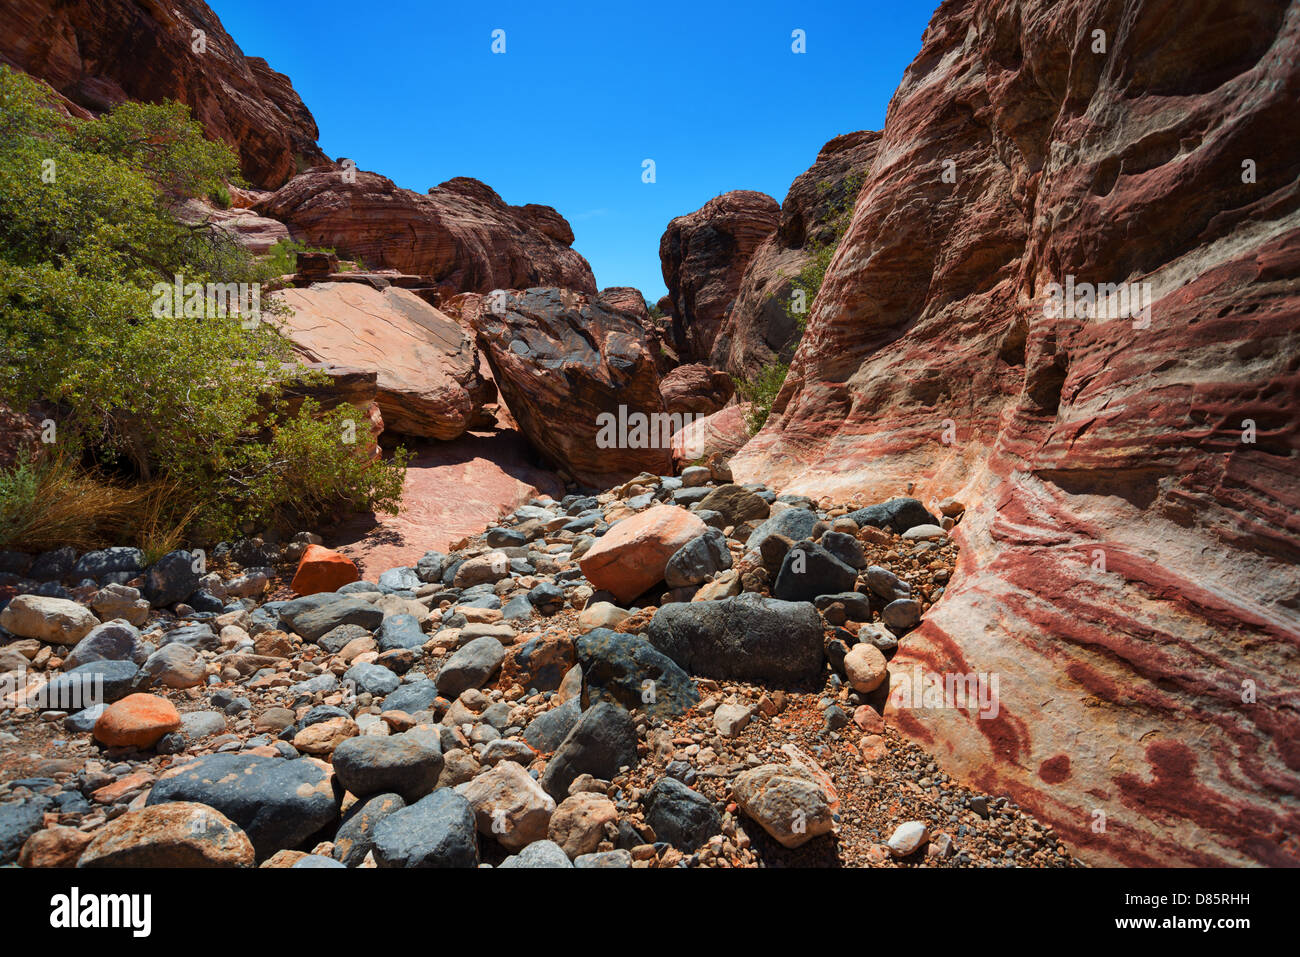 This is an image from Red Rock Canyon, California. Stock Photo